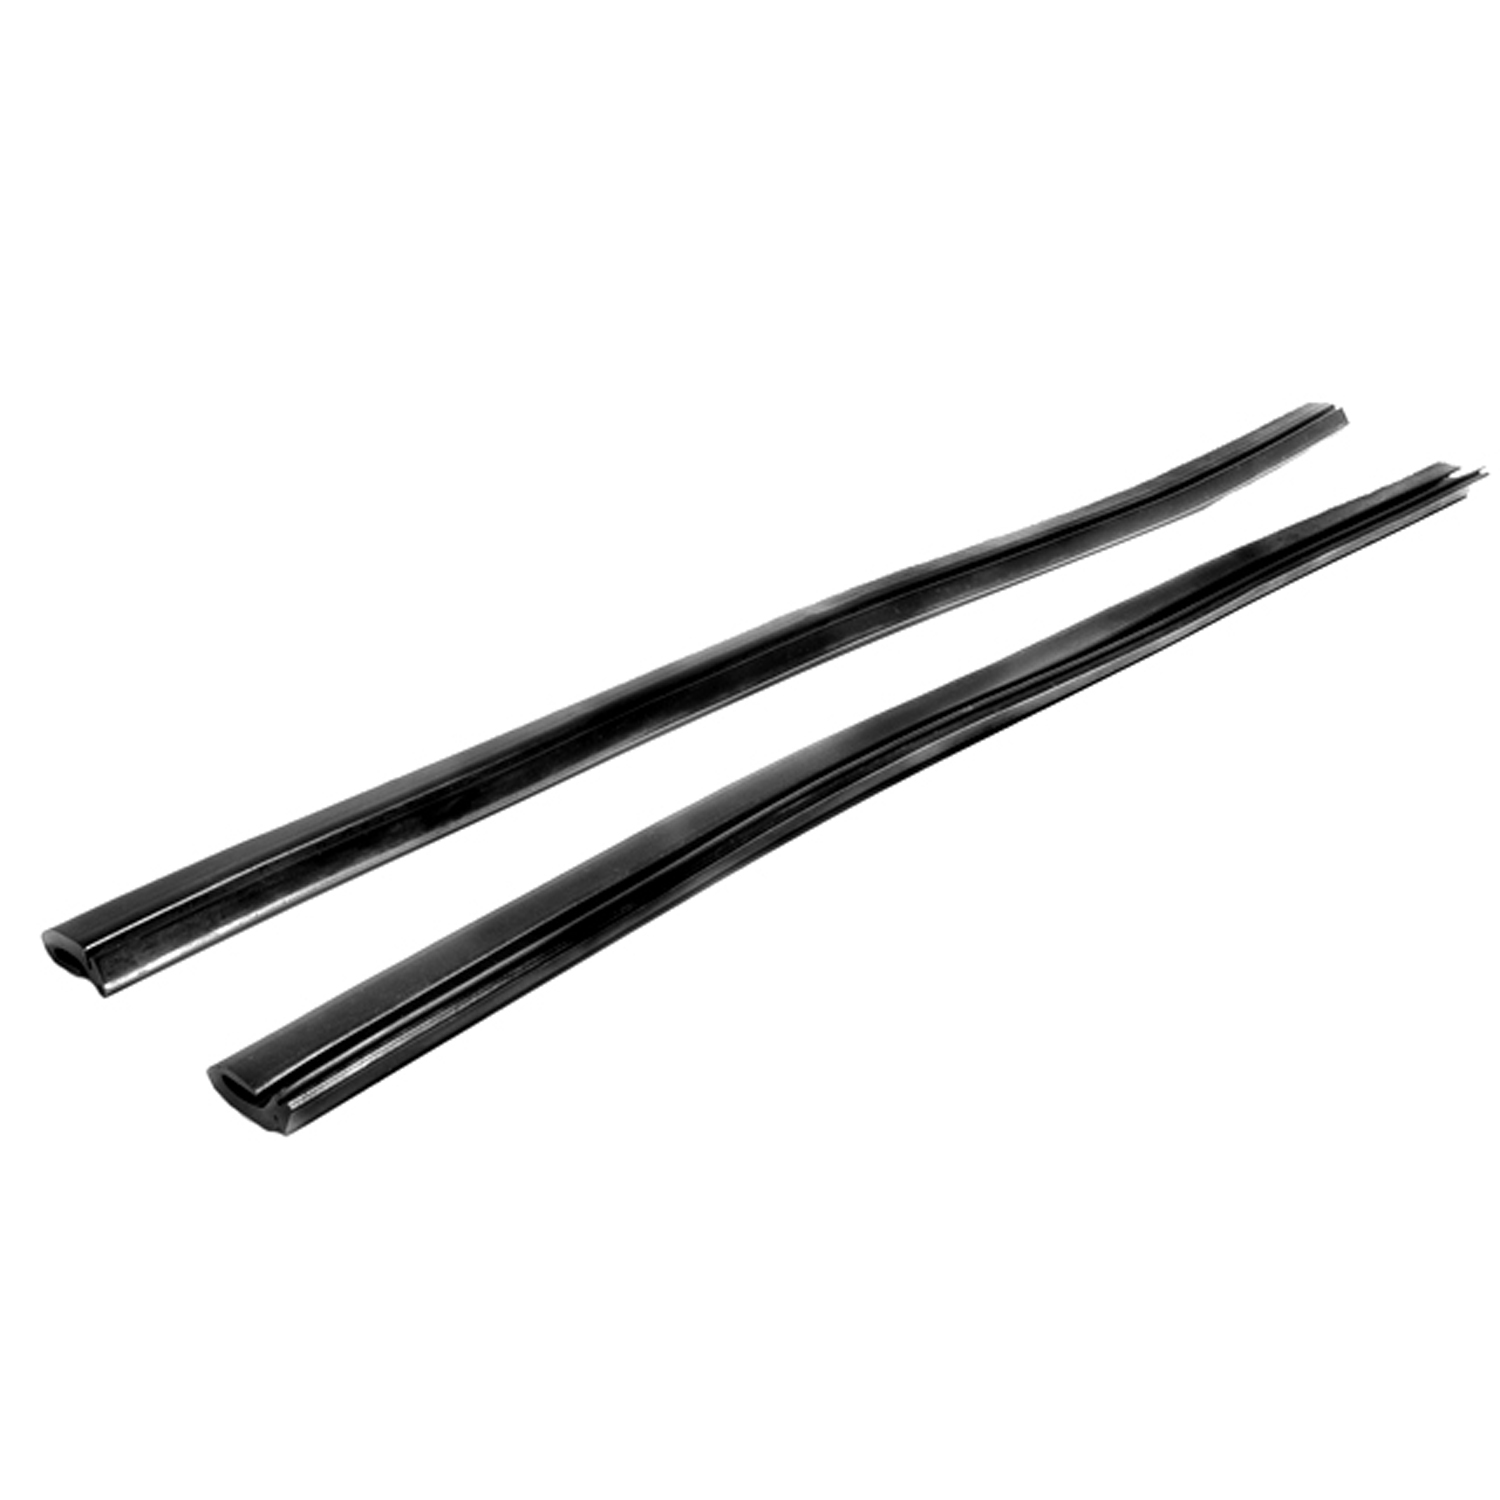 1966 Buick LeSabre Rear Side Roll-Up Window Seal, for Hardtops and Convertibles-VS 3